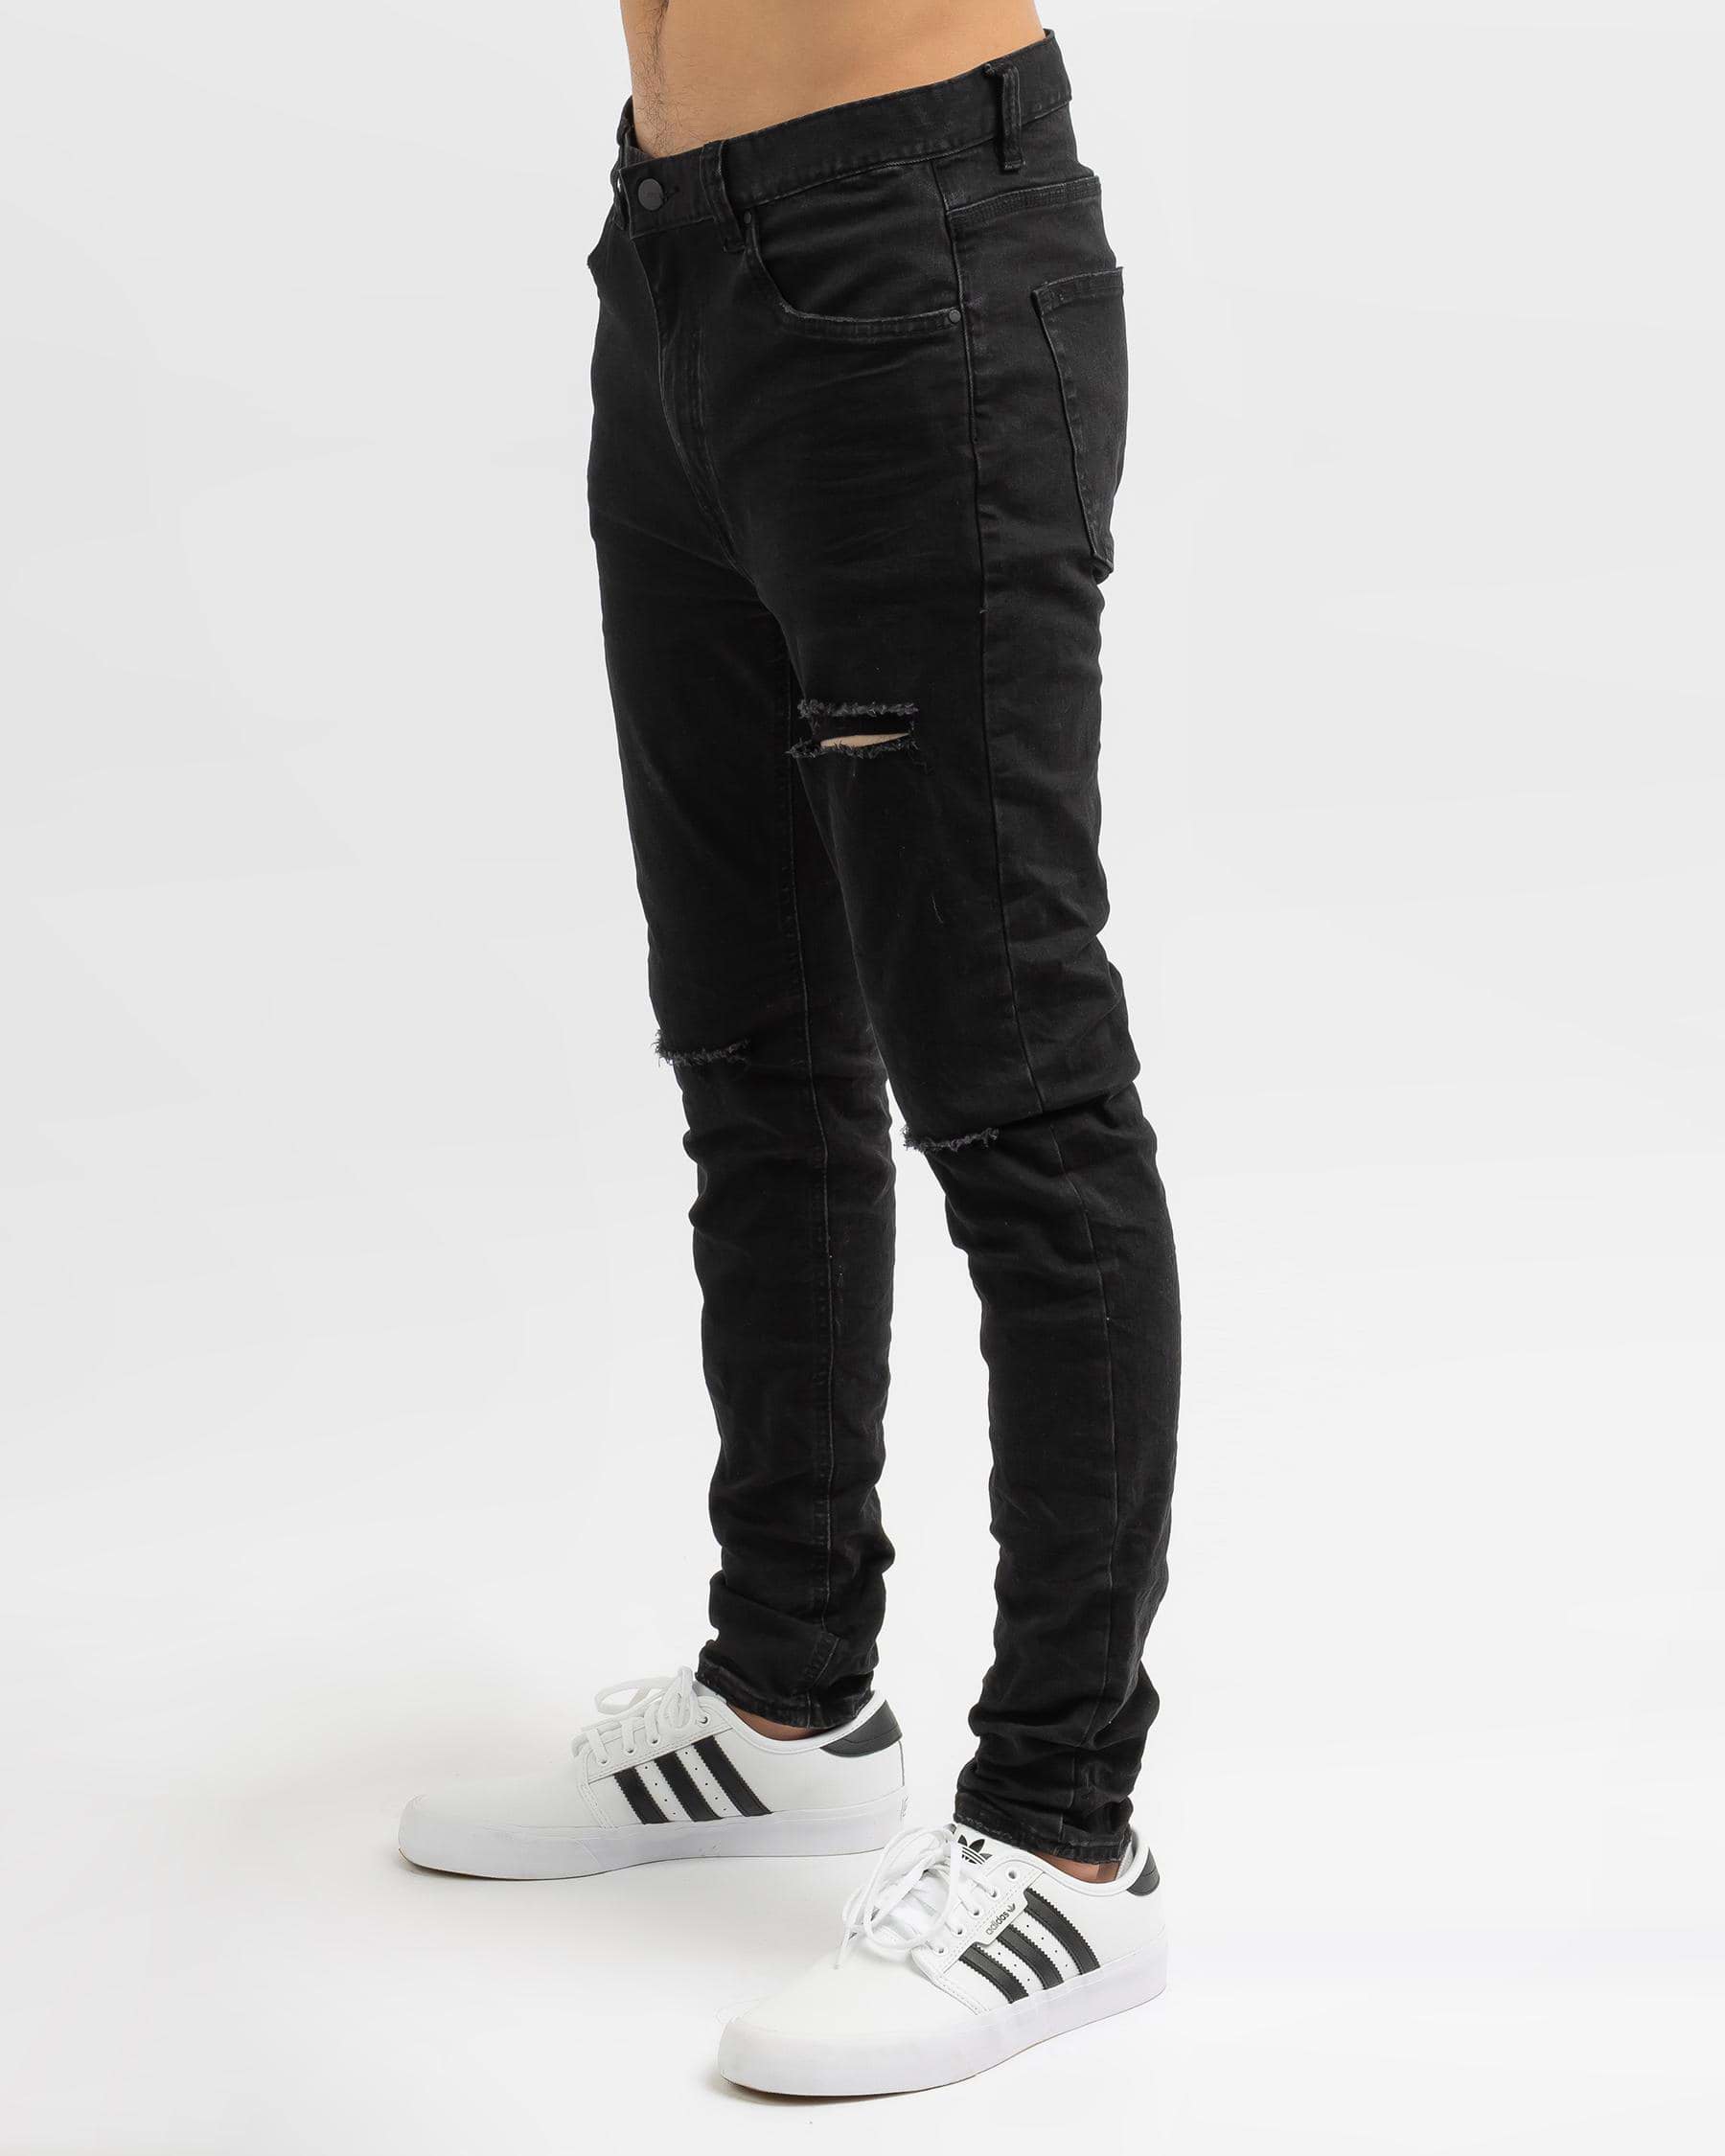 Kiss Chacey K1 Super Skinny Jeans In Destroyed Washed Black - Fast ...